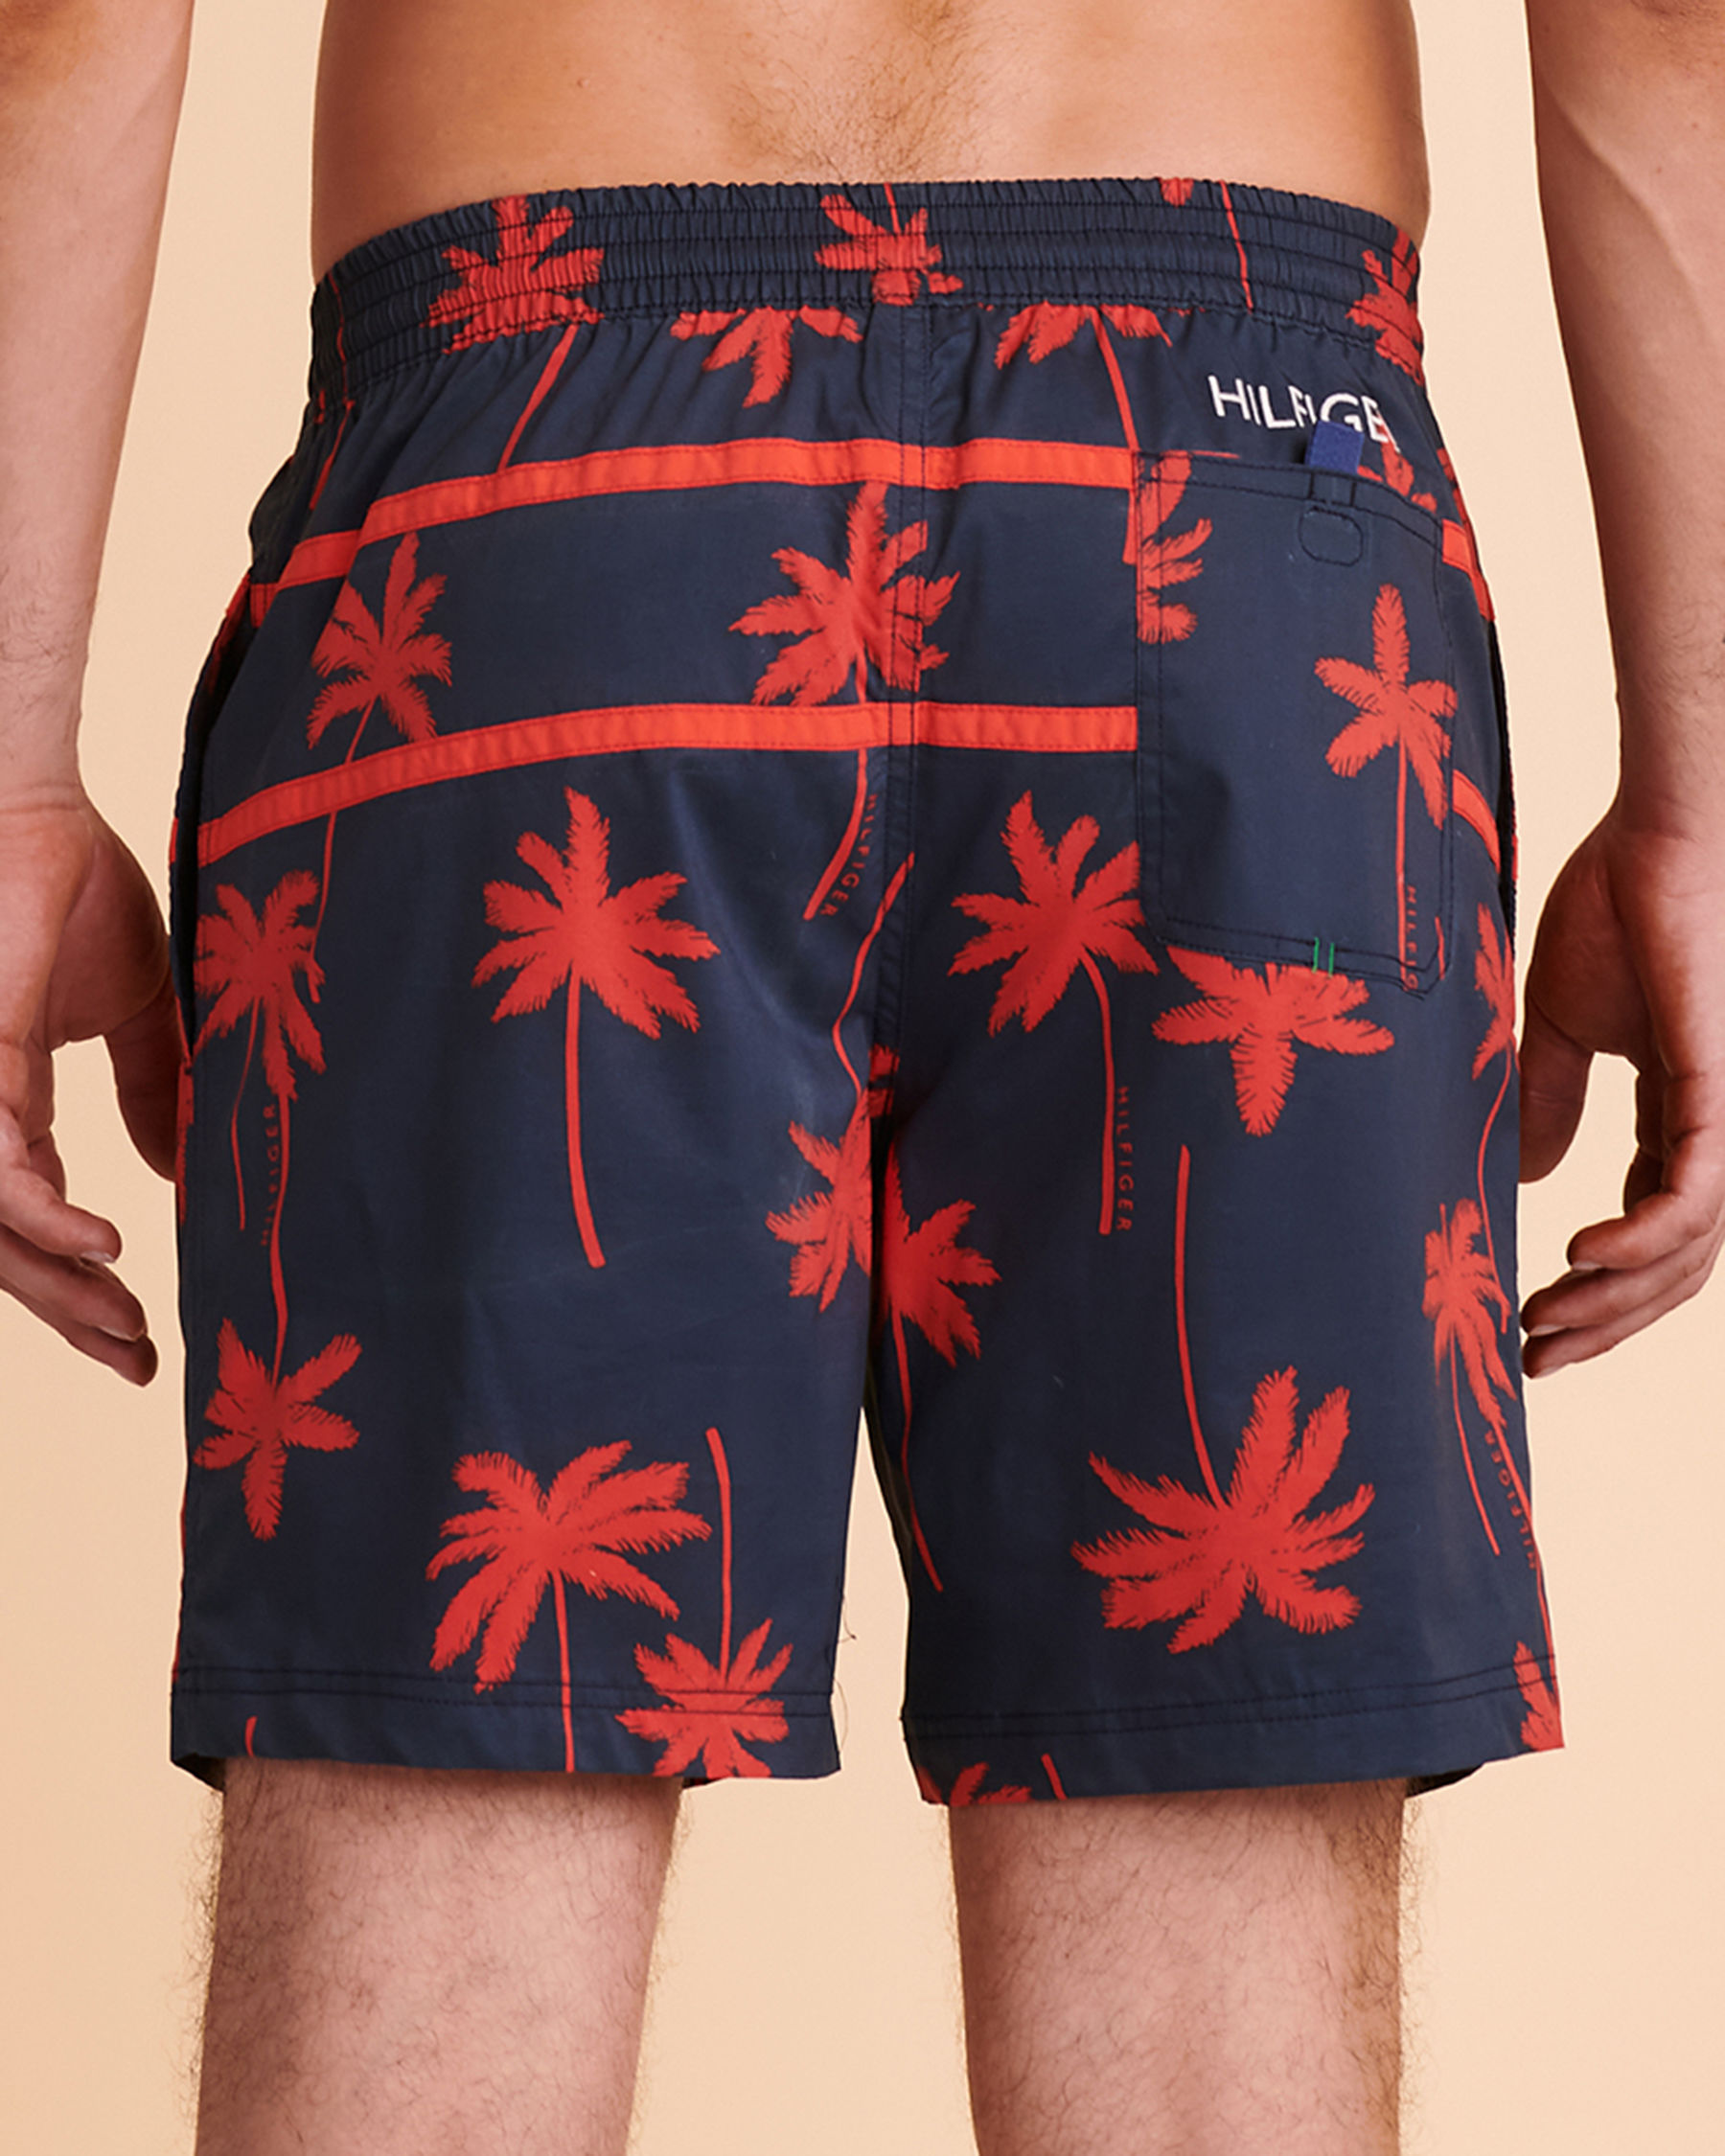 TOMMY HILFIGER SALUDA PALM Volley Swimsuit Blue with red prints 8853210 - View3